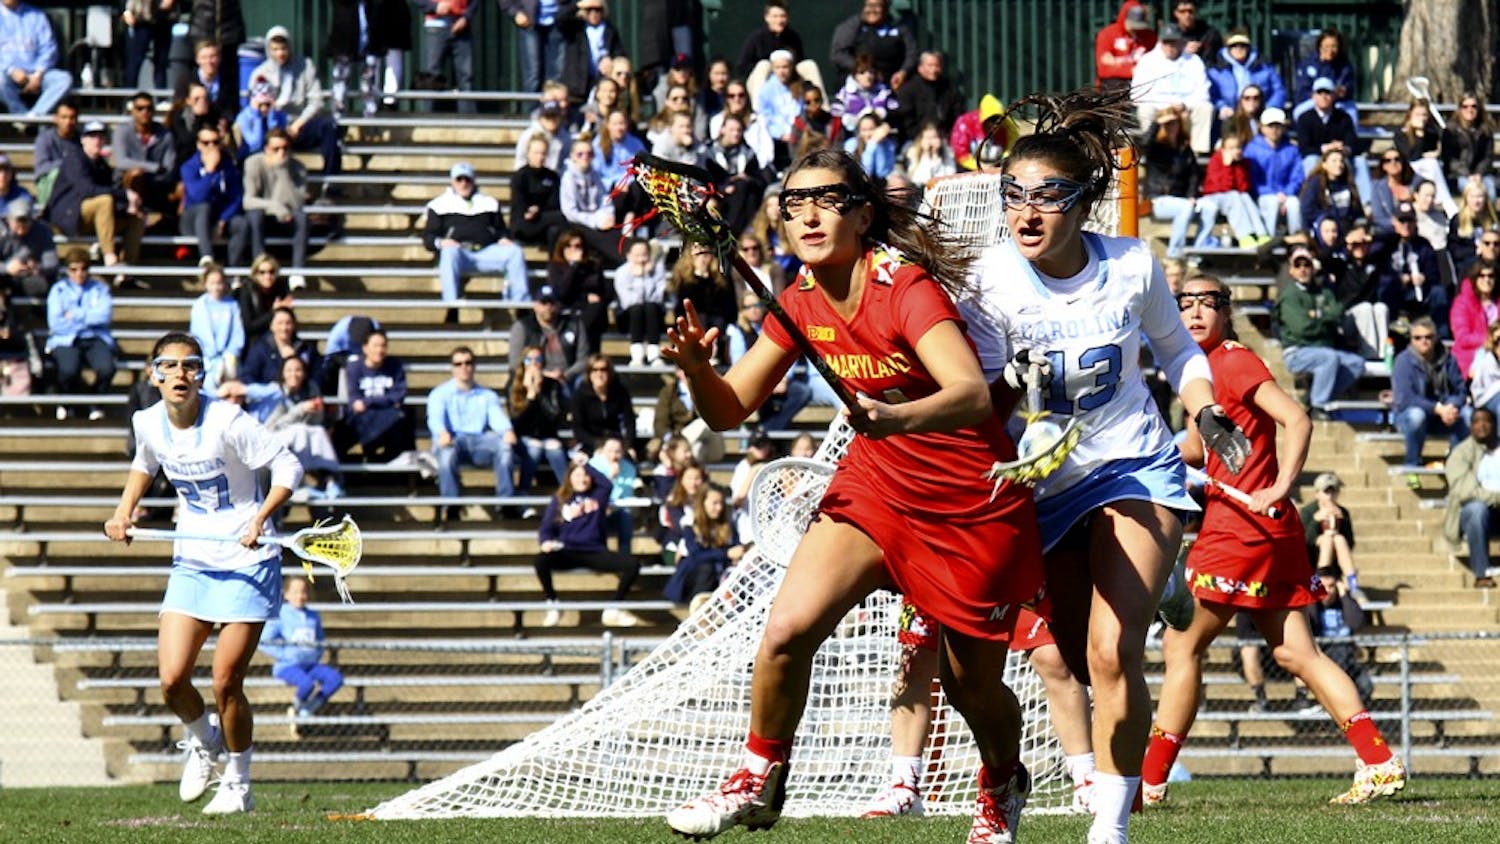 Sammy Jo Tracy (13) defends against a Maryland player Saturday afternoon. 